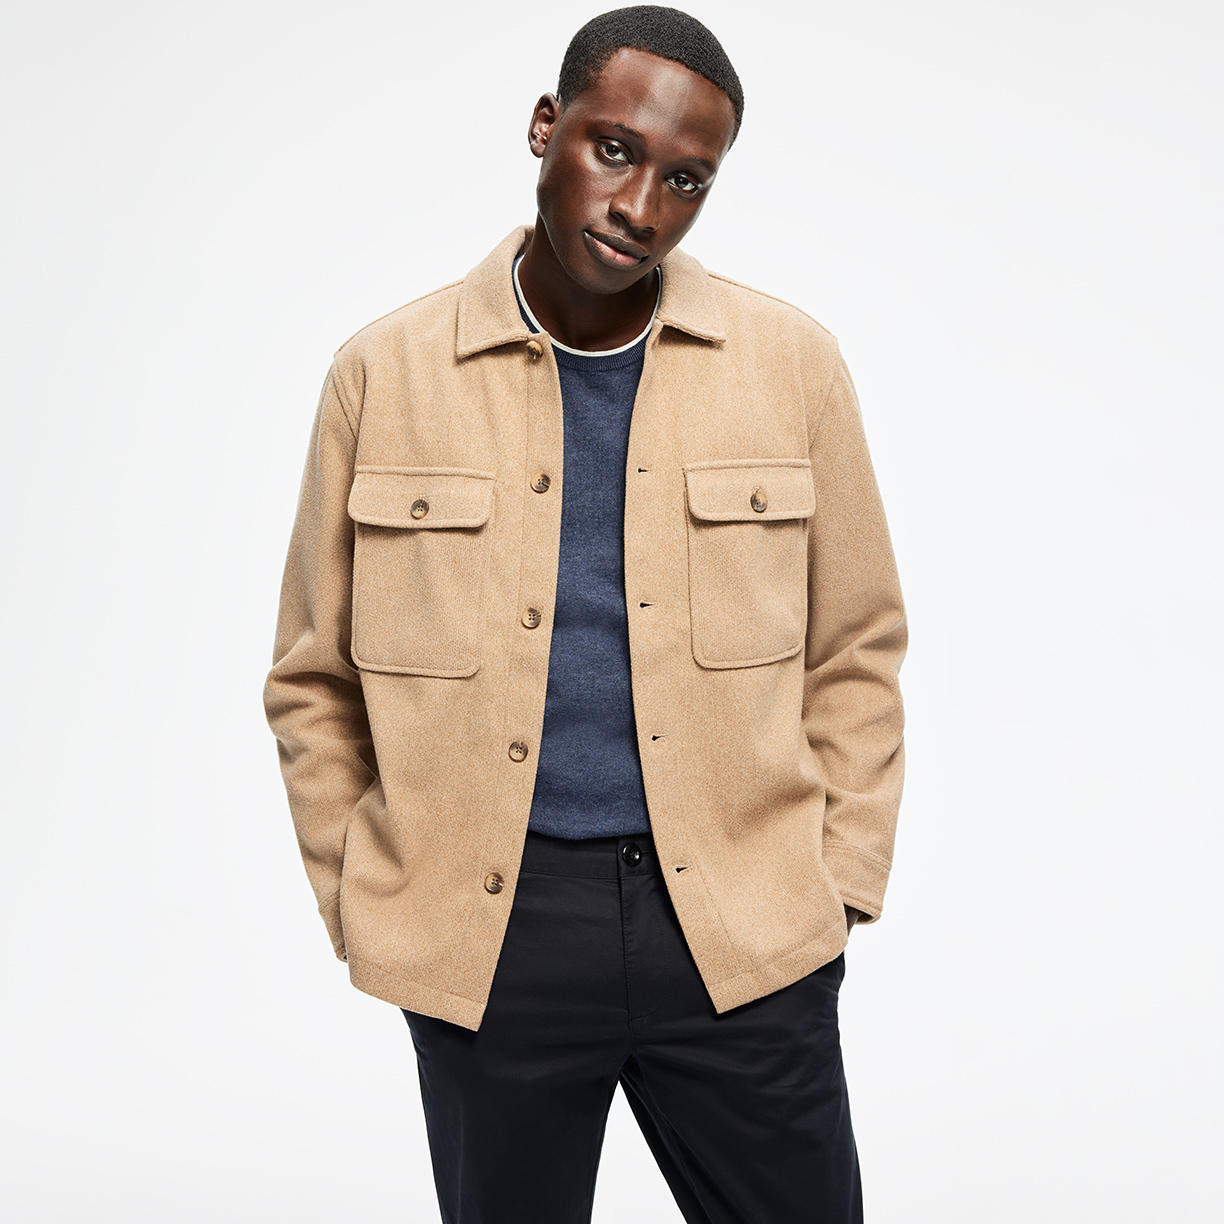 Men's Jackets & More Feat. Barbour Up to 60% Off